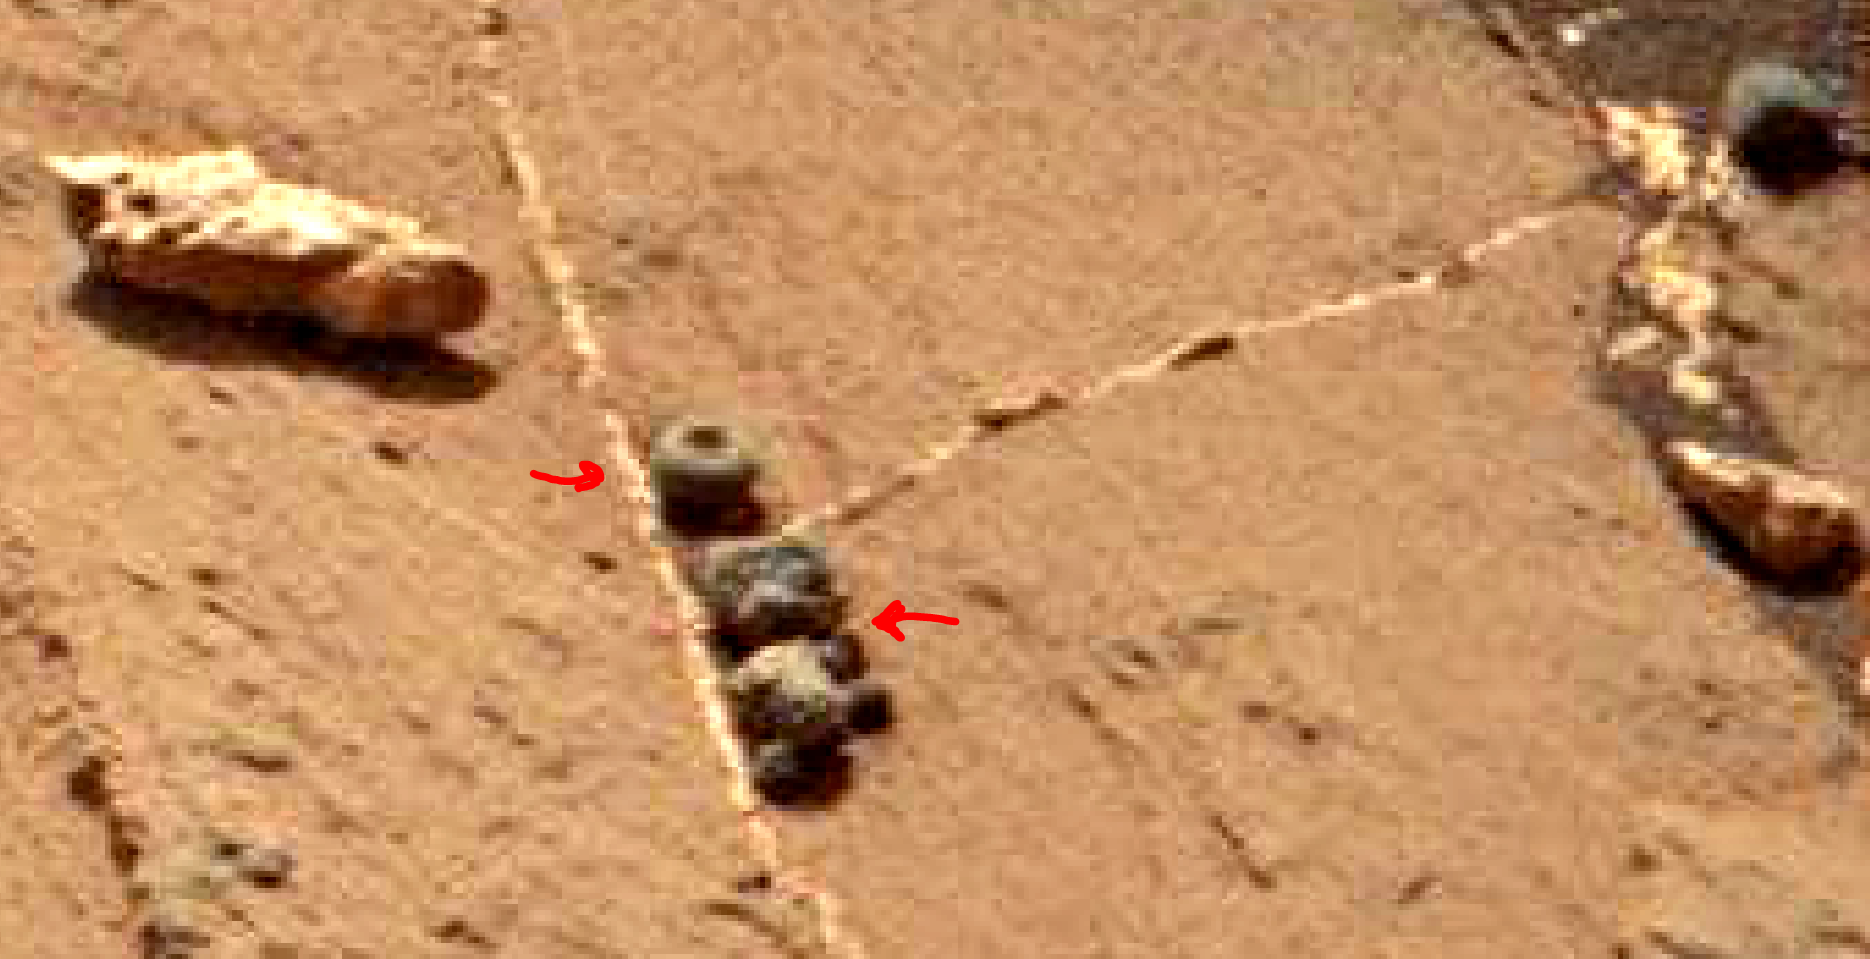 mars-sol-1456-anomaly-artifacts-1a-was-life-on-mars